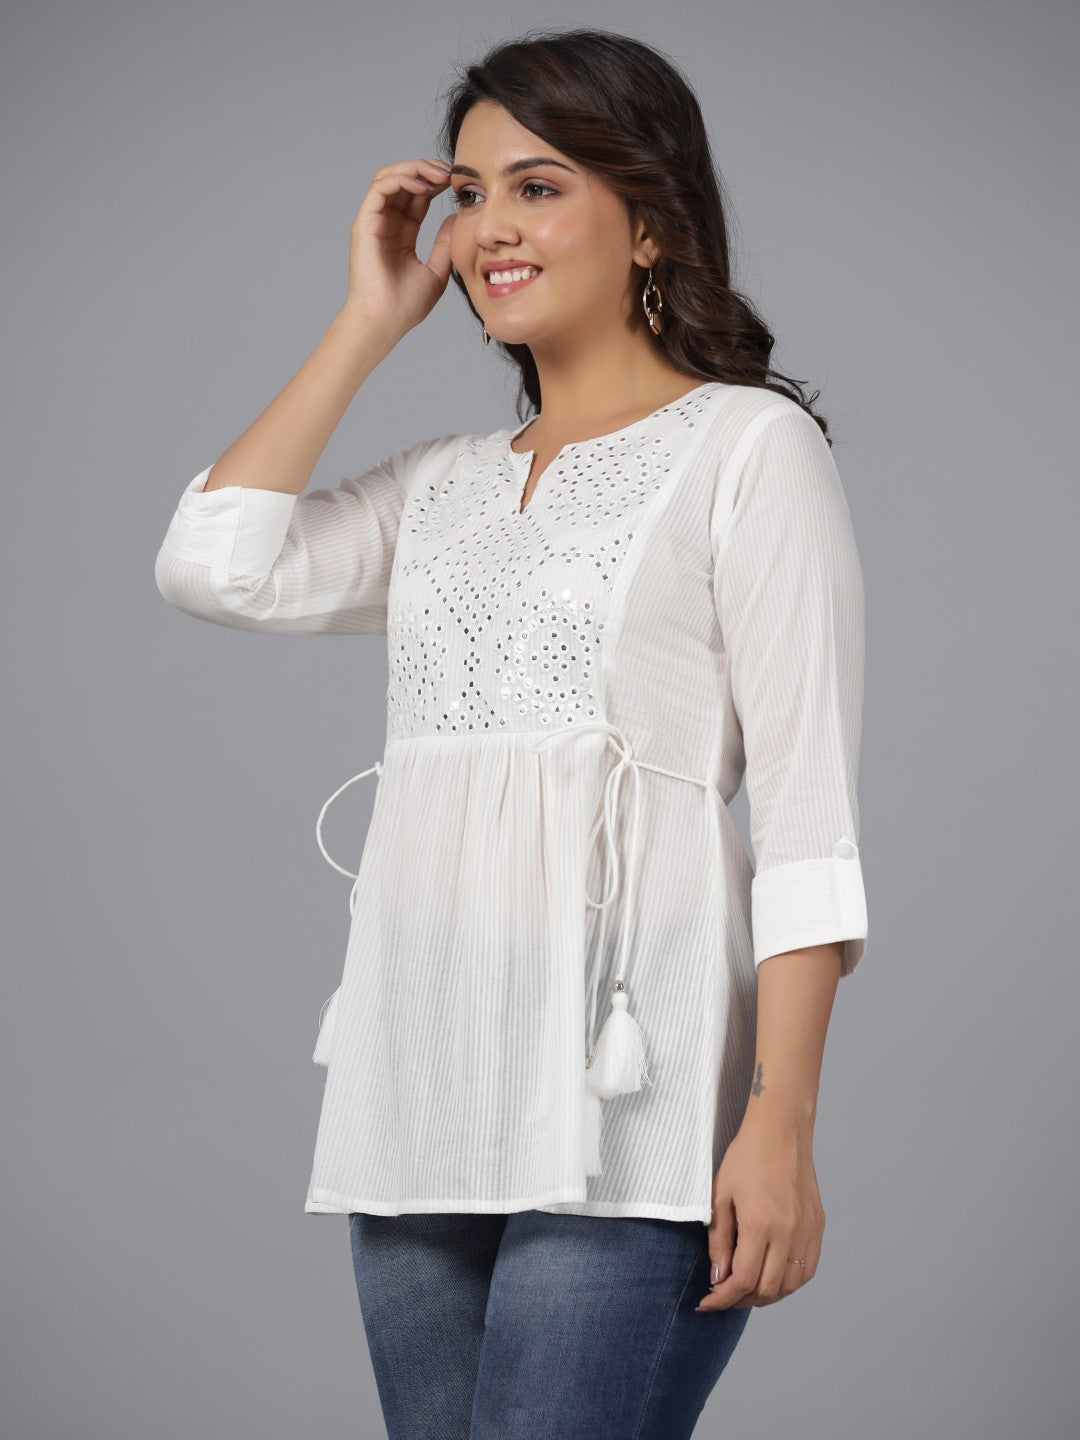 Juniper Women White Cotton Dobby Solid with Embroidered A-Line Tunic